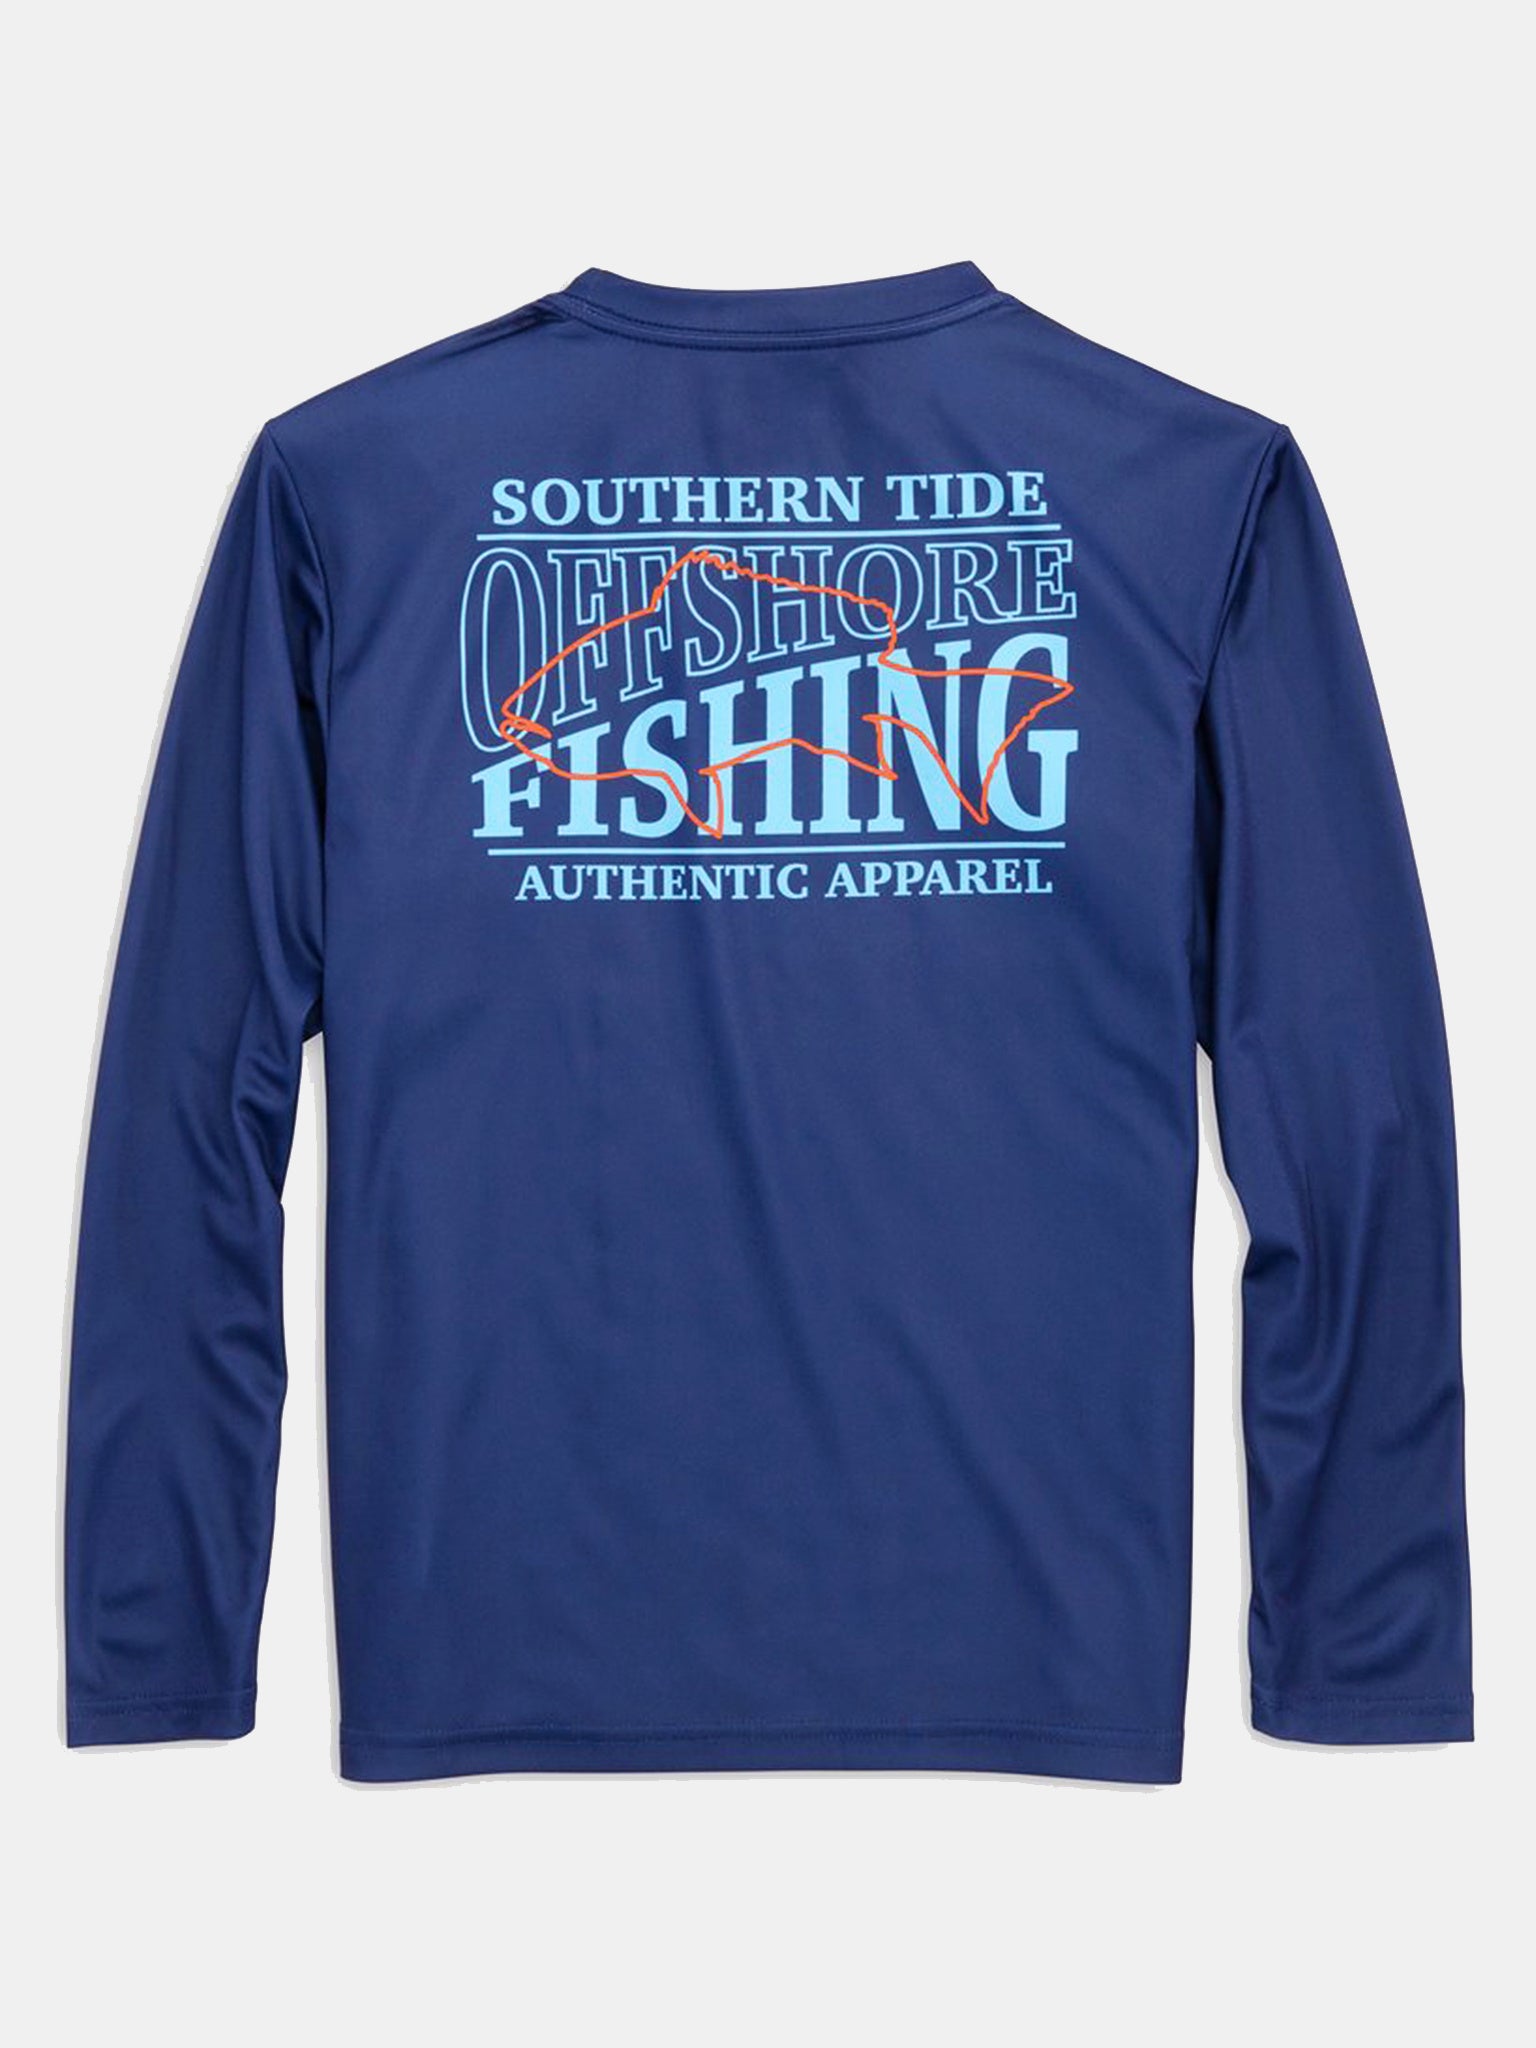 Southern Tide Boys' Offshore Fishing Performance Long-Sleeve T